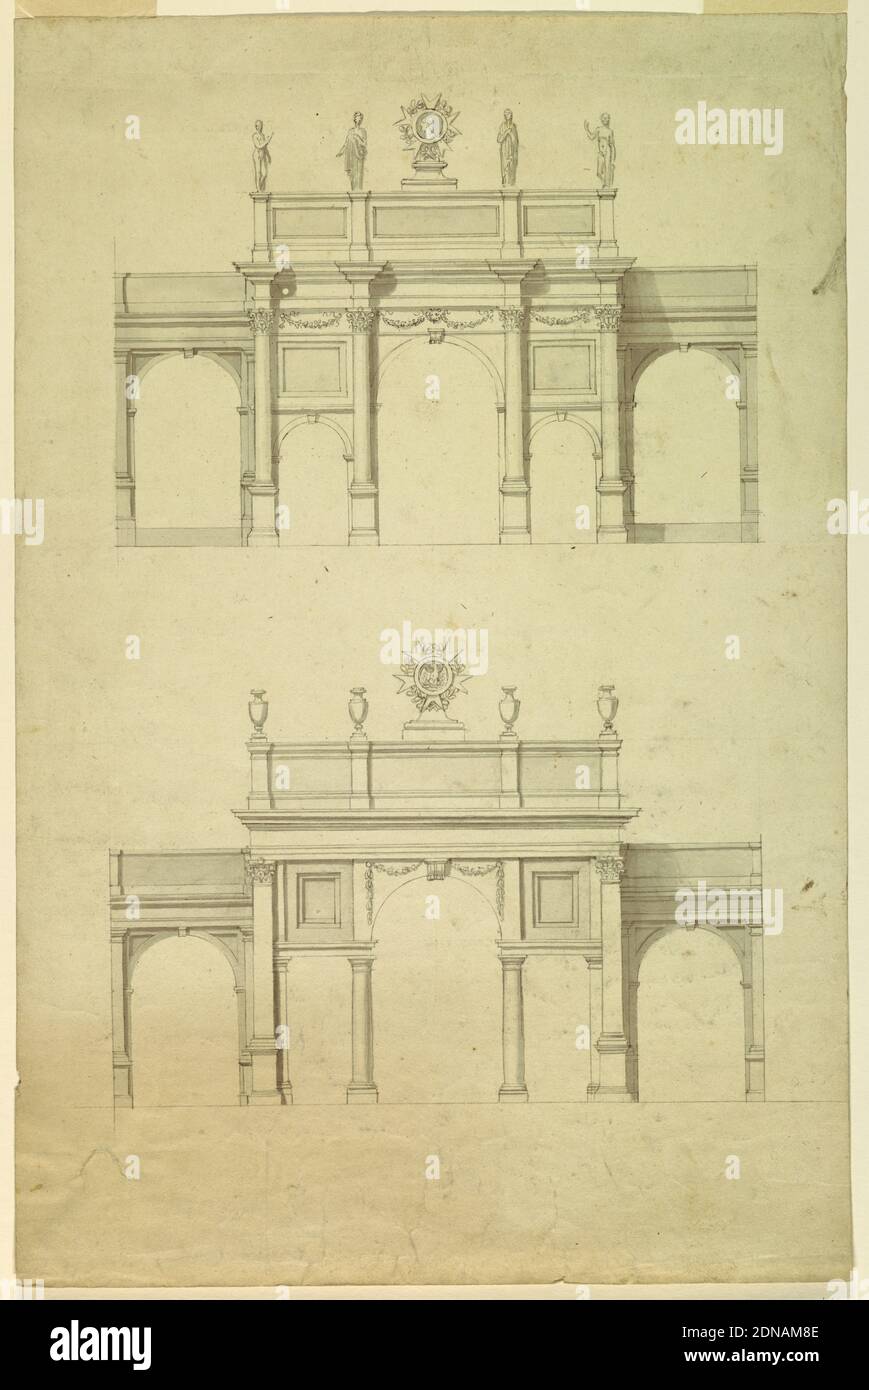 Elevations for Two Triumphal Arches in Honor of the Emperor Napoleon, Luigi Cagnola, Italian, 1762 - 1833, Pen and black ink with gray wash and traces of graphite on off-white wove paper, Top design shows five arches with Corinthian columns, festoons and statues flanking the badge of the Legion of Honor showing the head of Napoleon. The bottom design shows a Palladian archway with Doric columns, Corinthian pilasters, vases, and the badge of the Legion of Honor with an eagle facing left., Italy, ca. 1810, architecture, Drawing Stock Photo